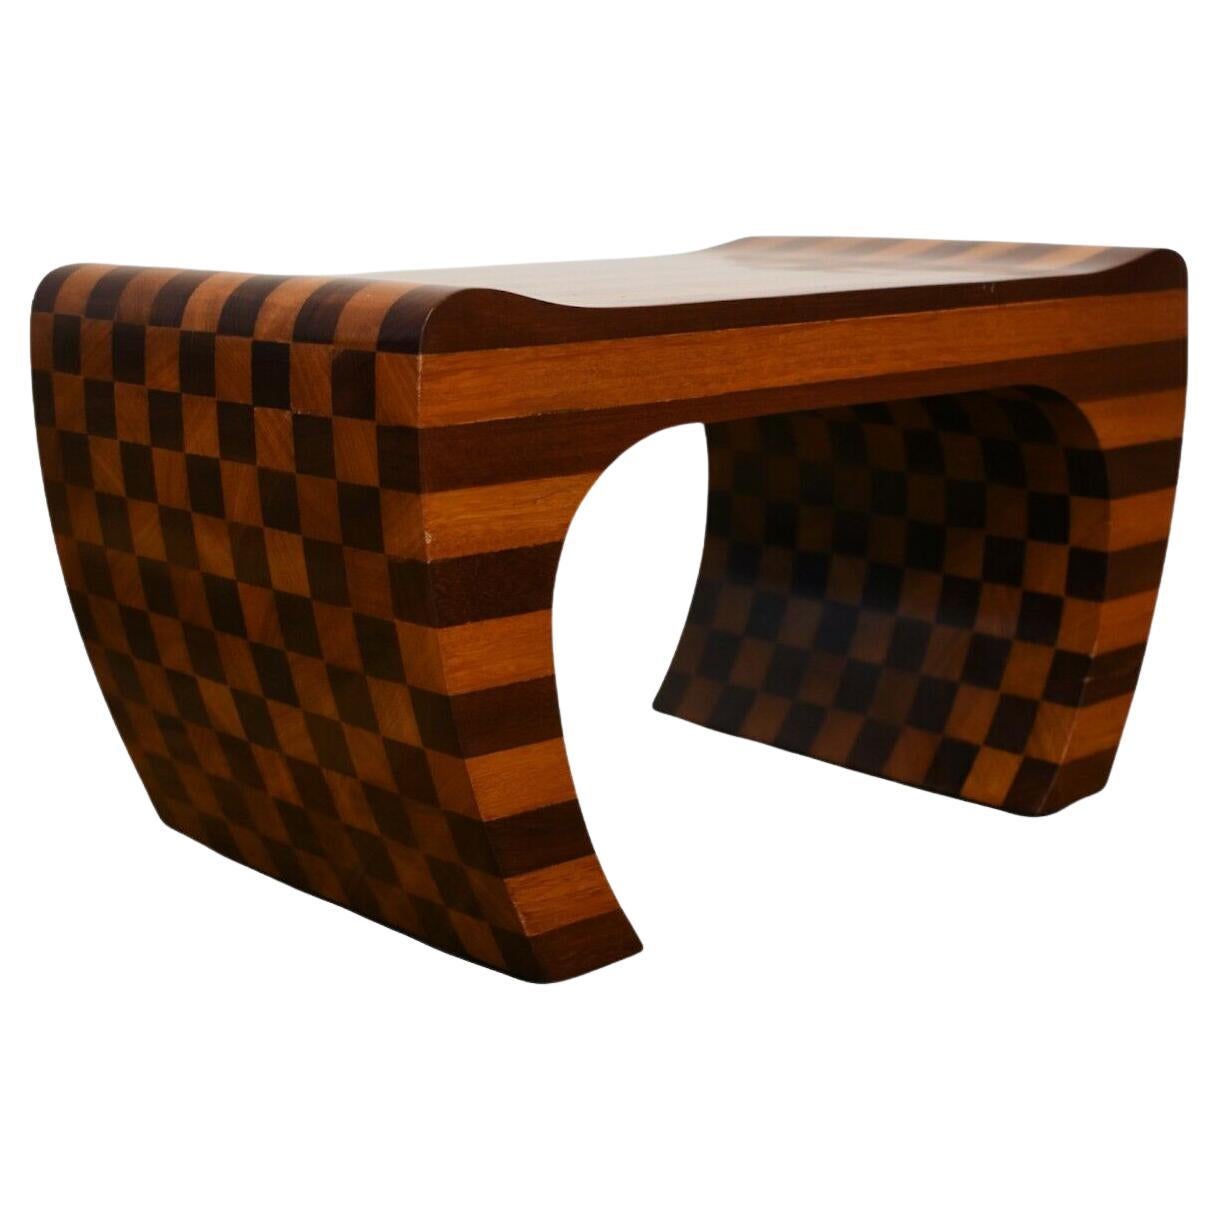 Amazonian Checkered Foot Stool in Madeiras Wood, 1980's For Sale